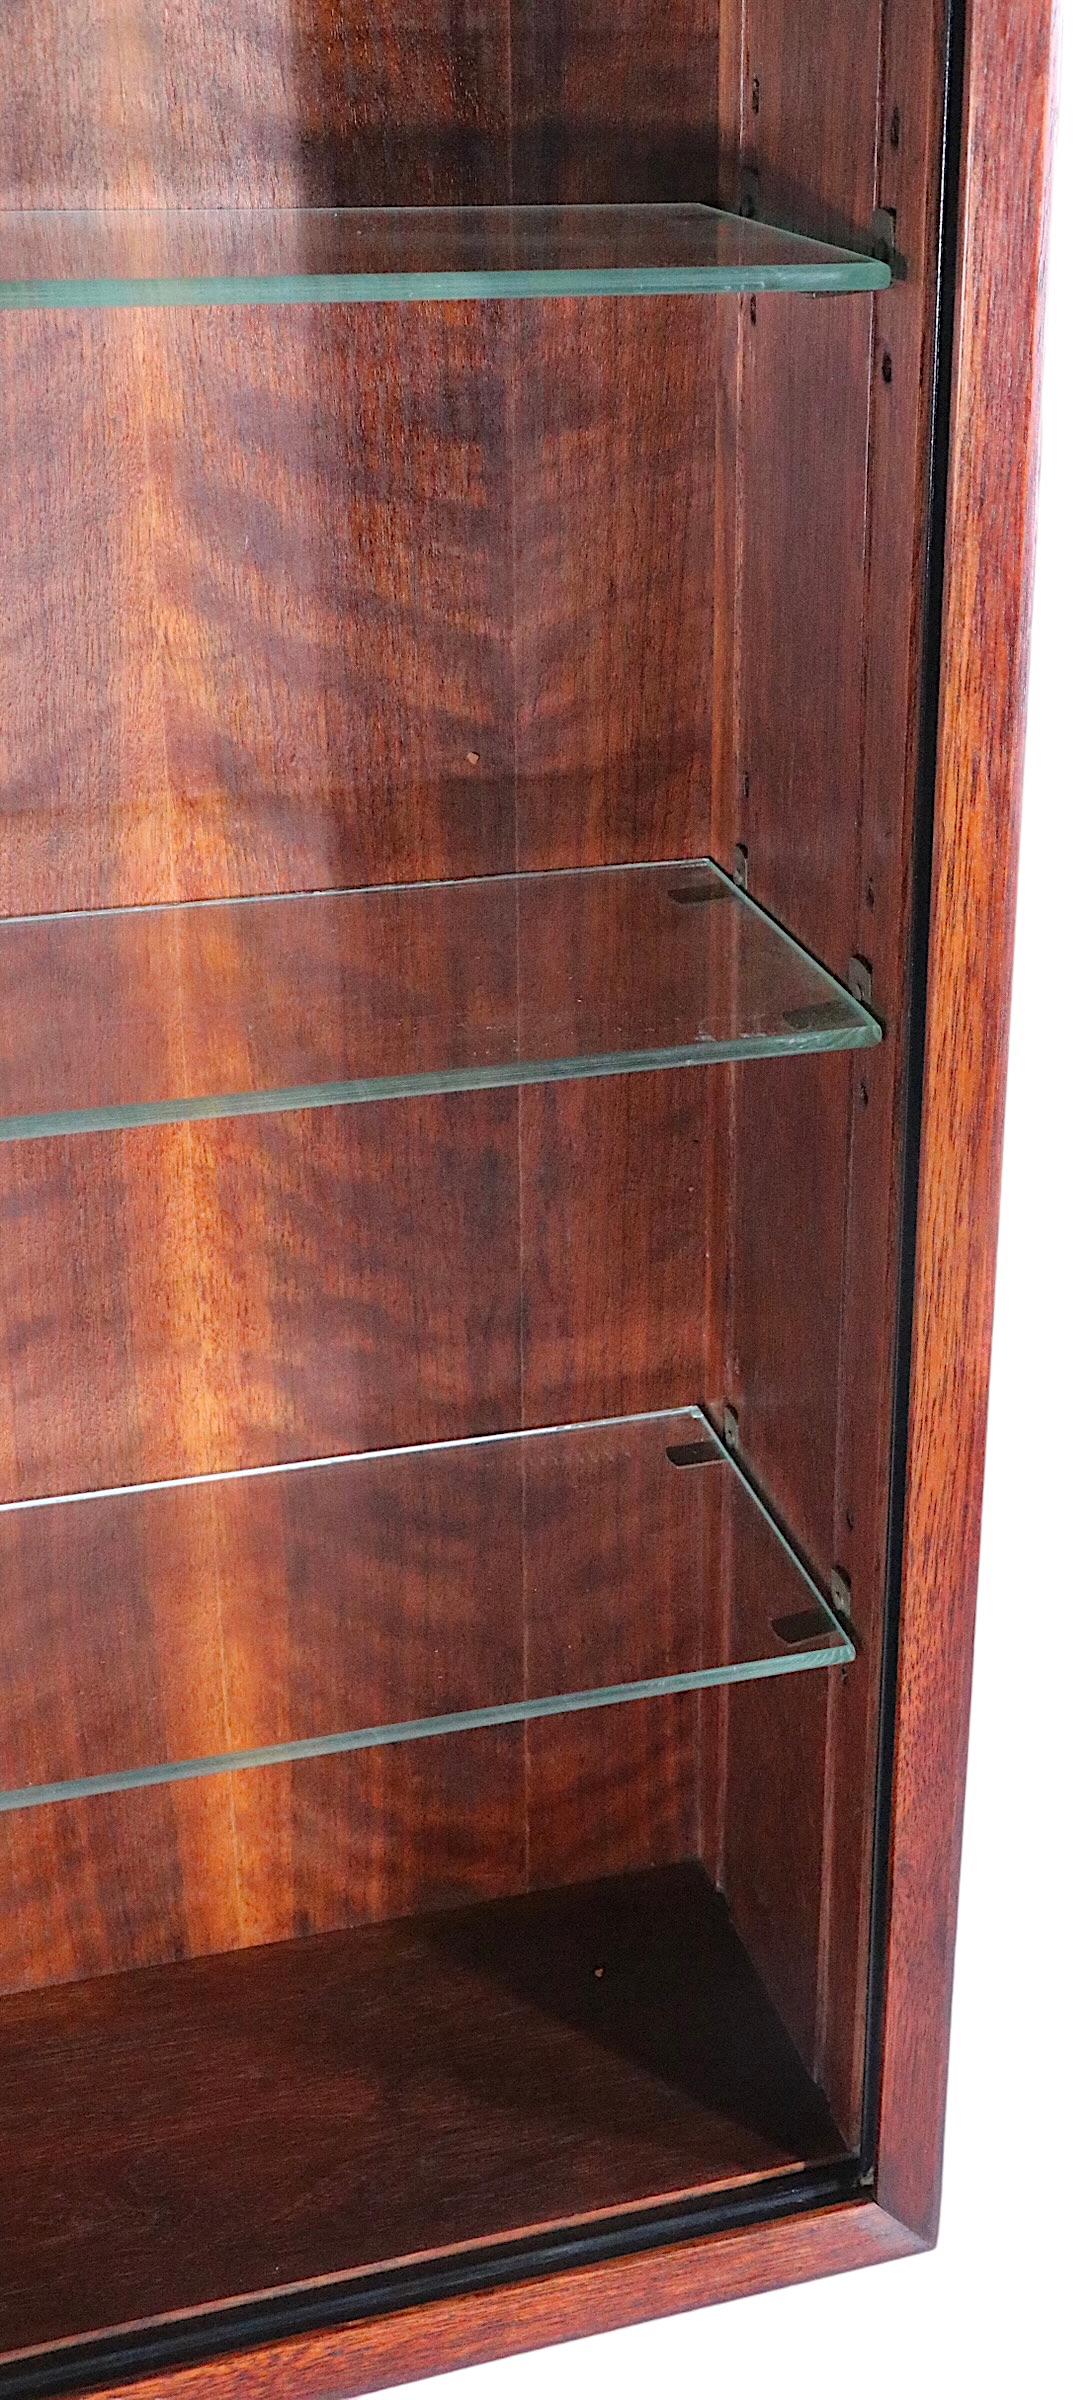 Danish Mid Century Wall Hanging Cabinet with Sliding Mirrored Doors, circa 1950s For Sale 5